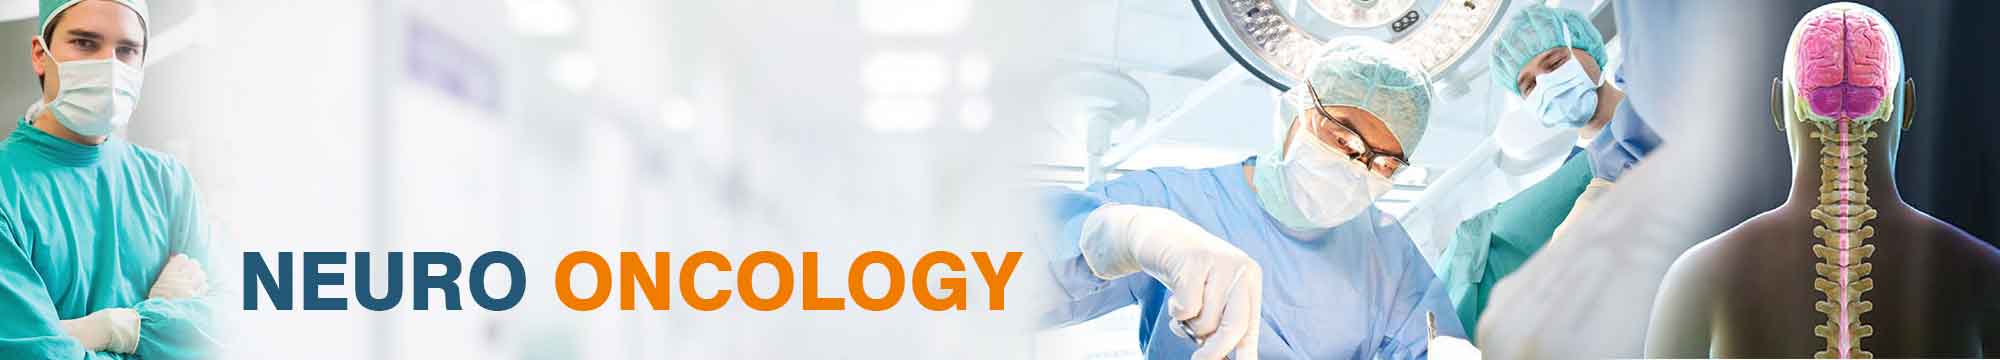 Neuro Oncology Hospitals in India